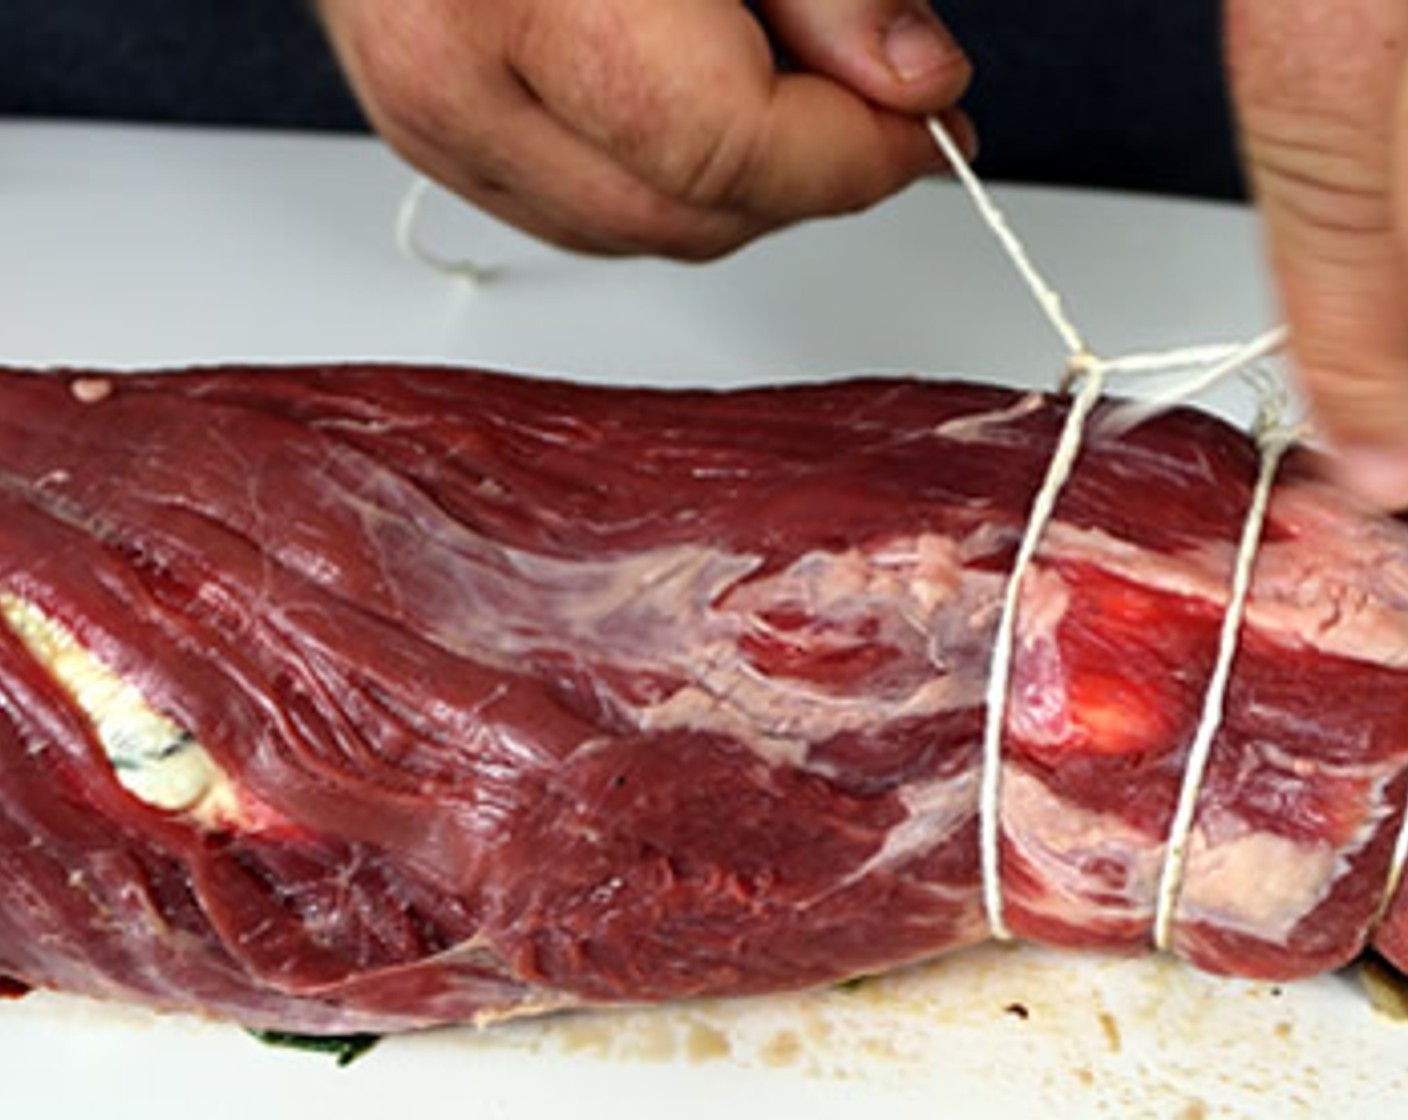 step 7 Use 16-inch pieces of butcher twine to tie the flank steak spacing each string out about 1 inch.